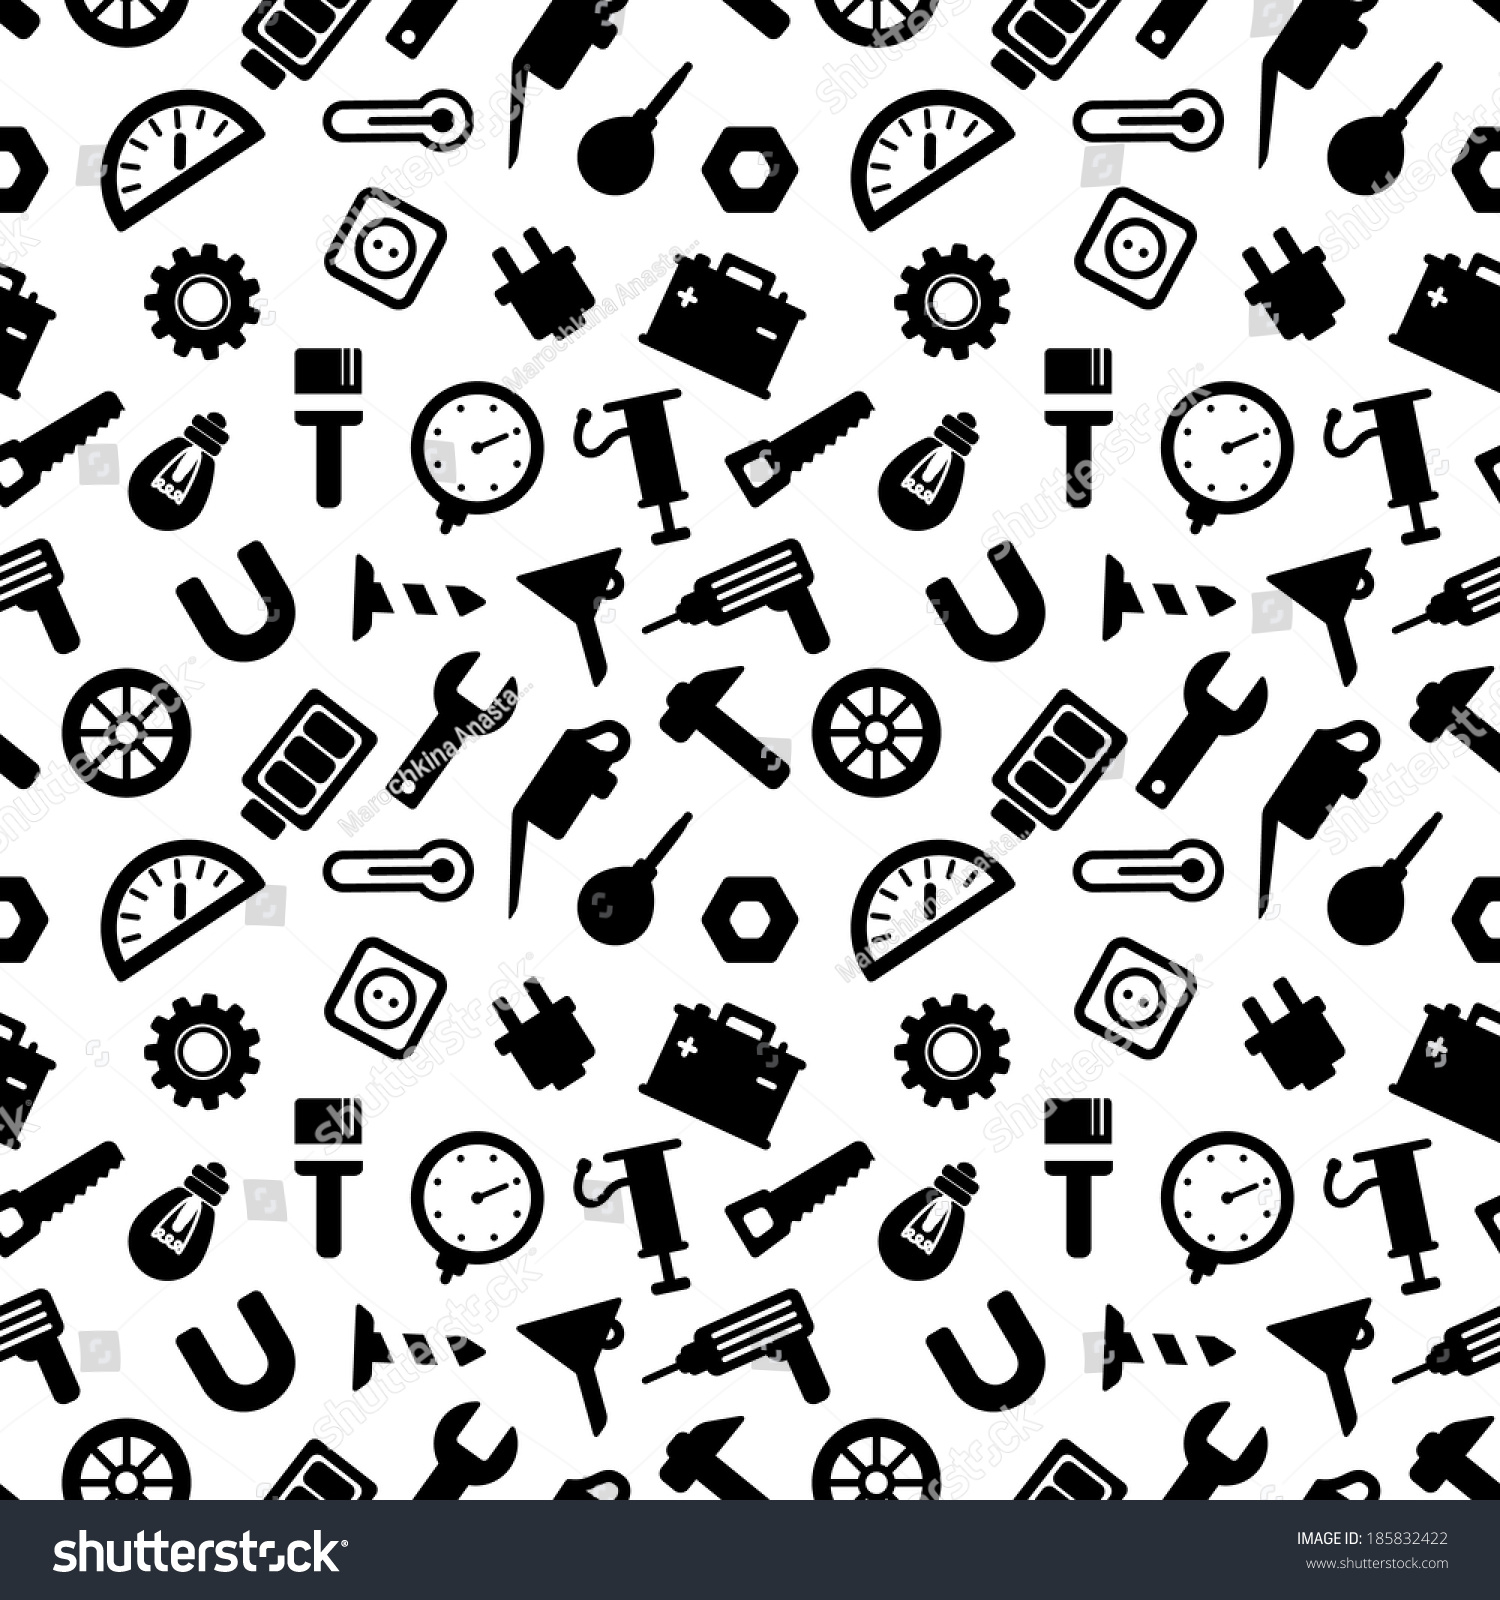 Seamless Pattern With Tools, Carpentry Tools Black Icons On White